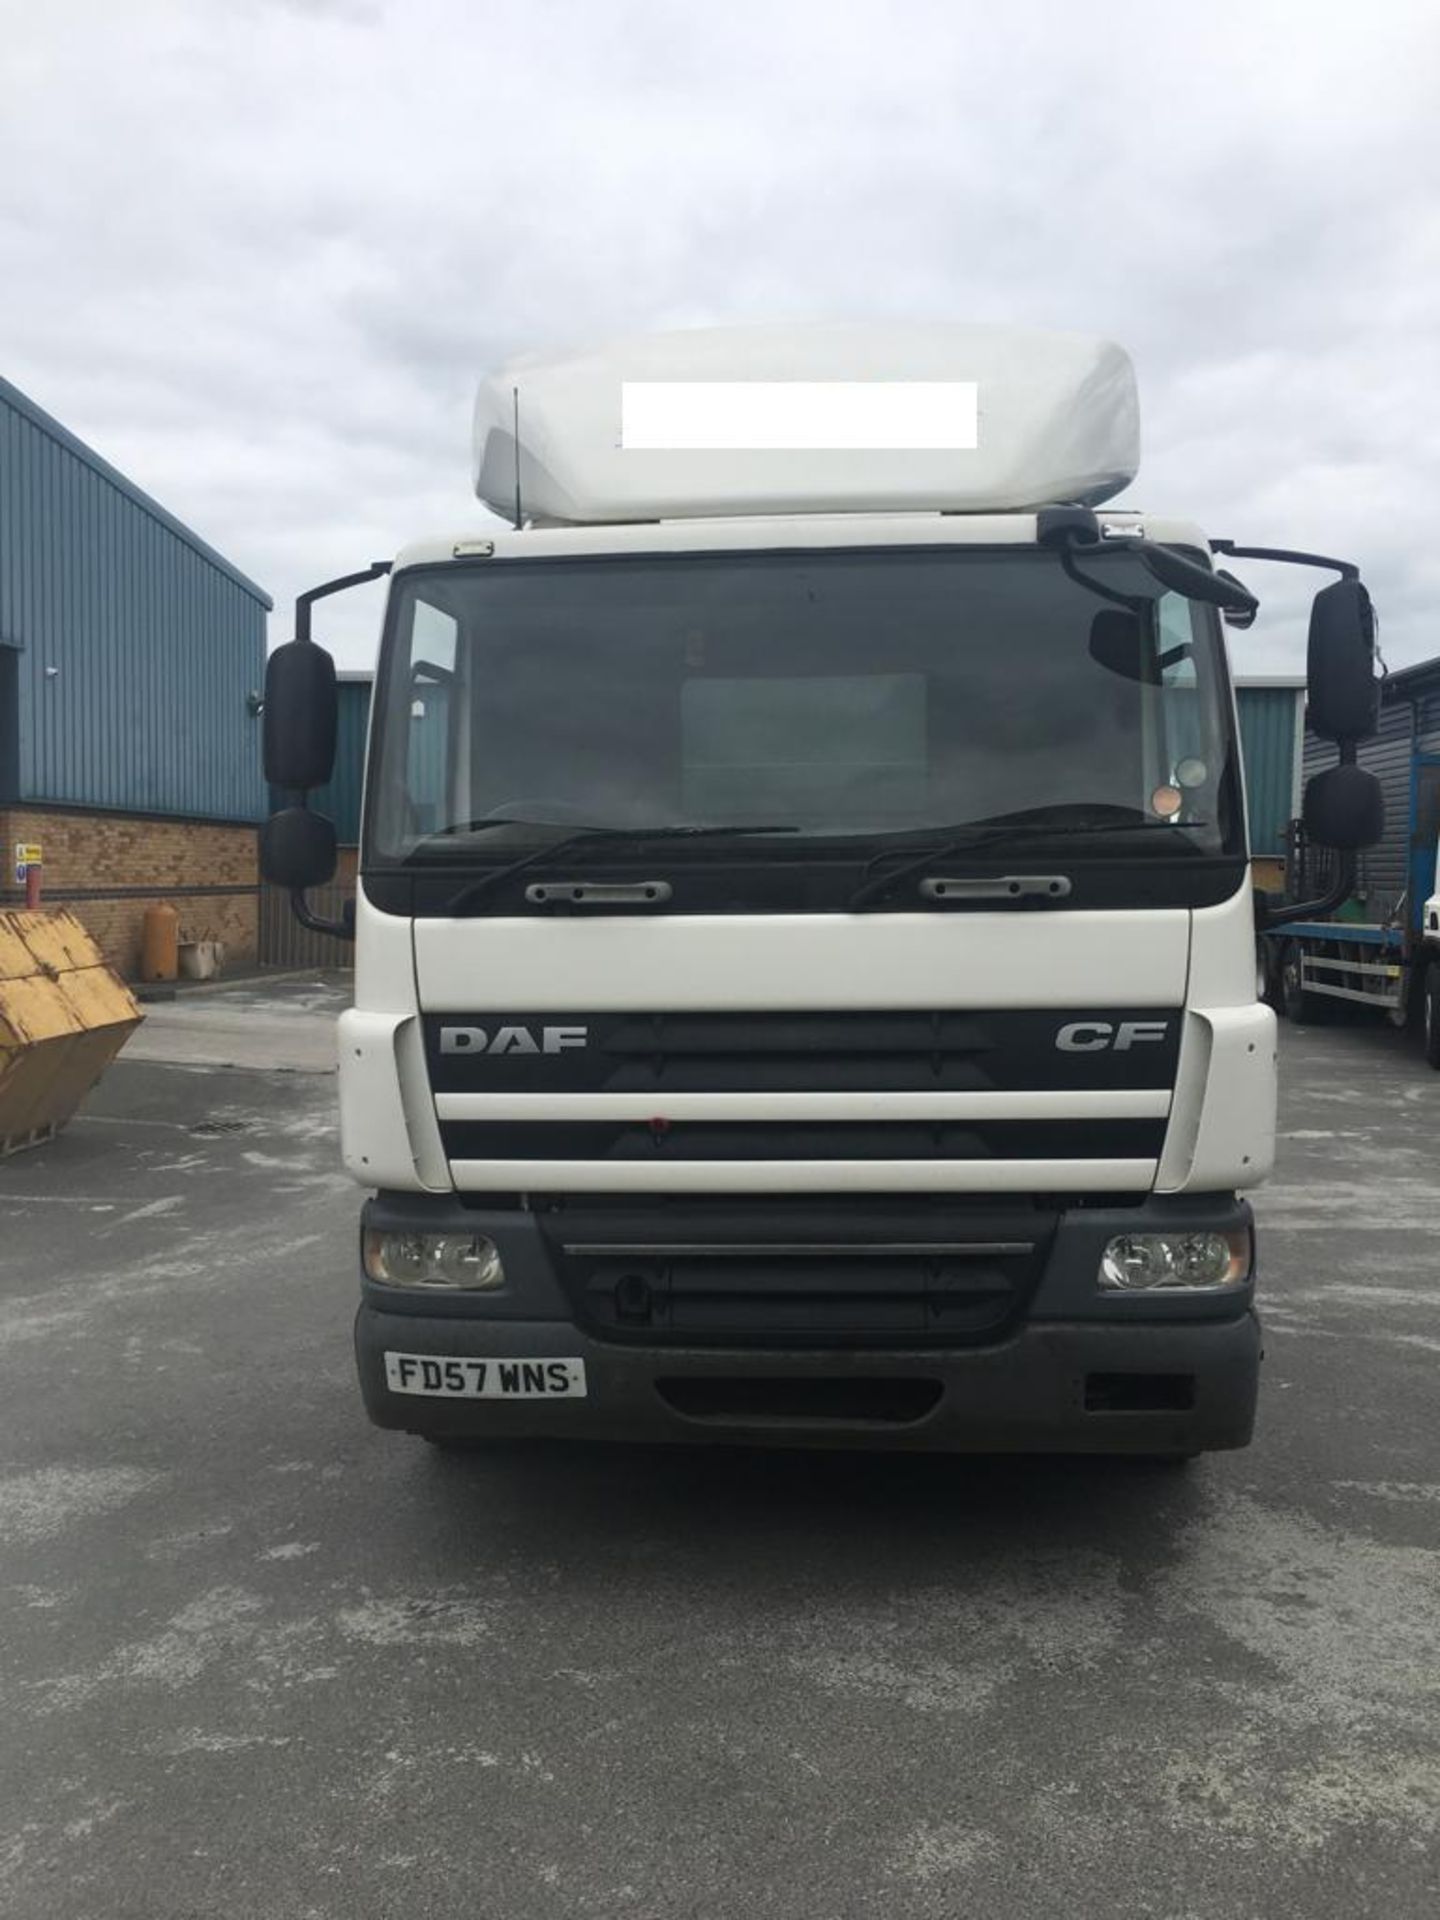 2007 DAF TRUCKS CF 9200CC **26000 KG GROSS** WITH FORKLIFT INCLUDED - Image 2 of 12